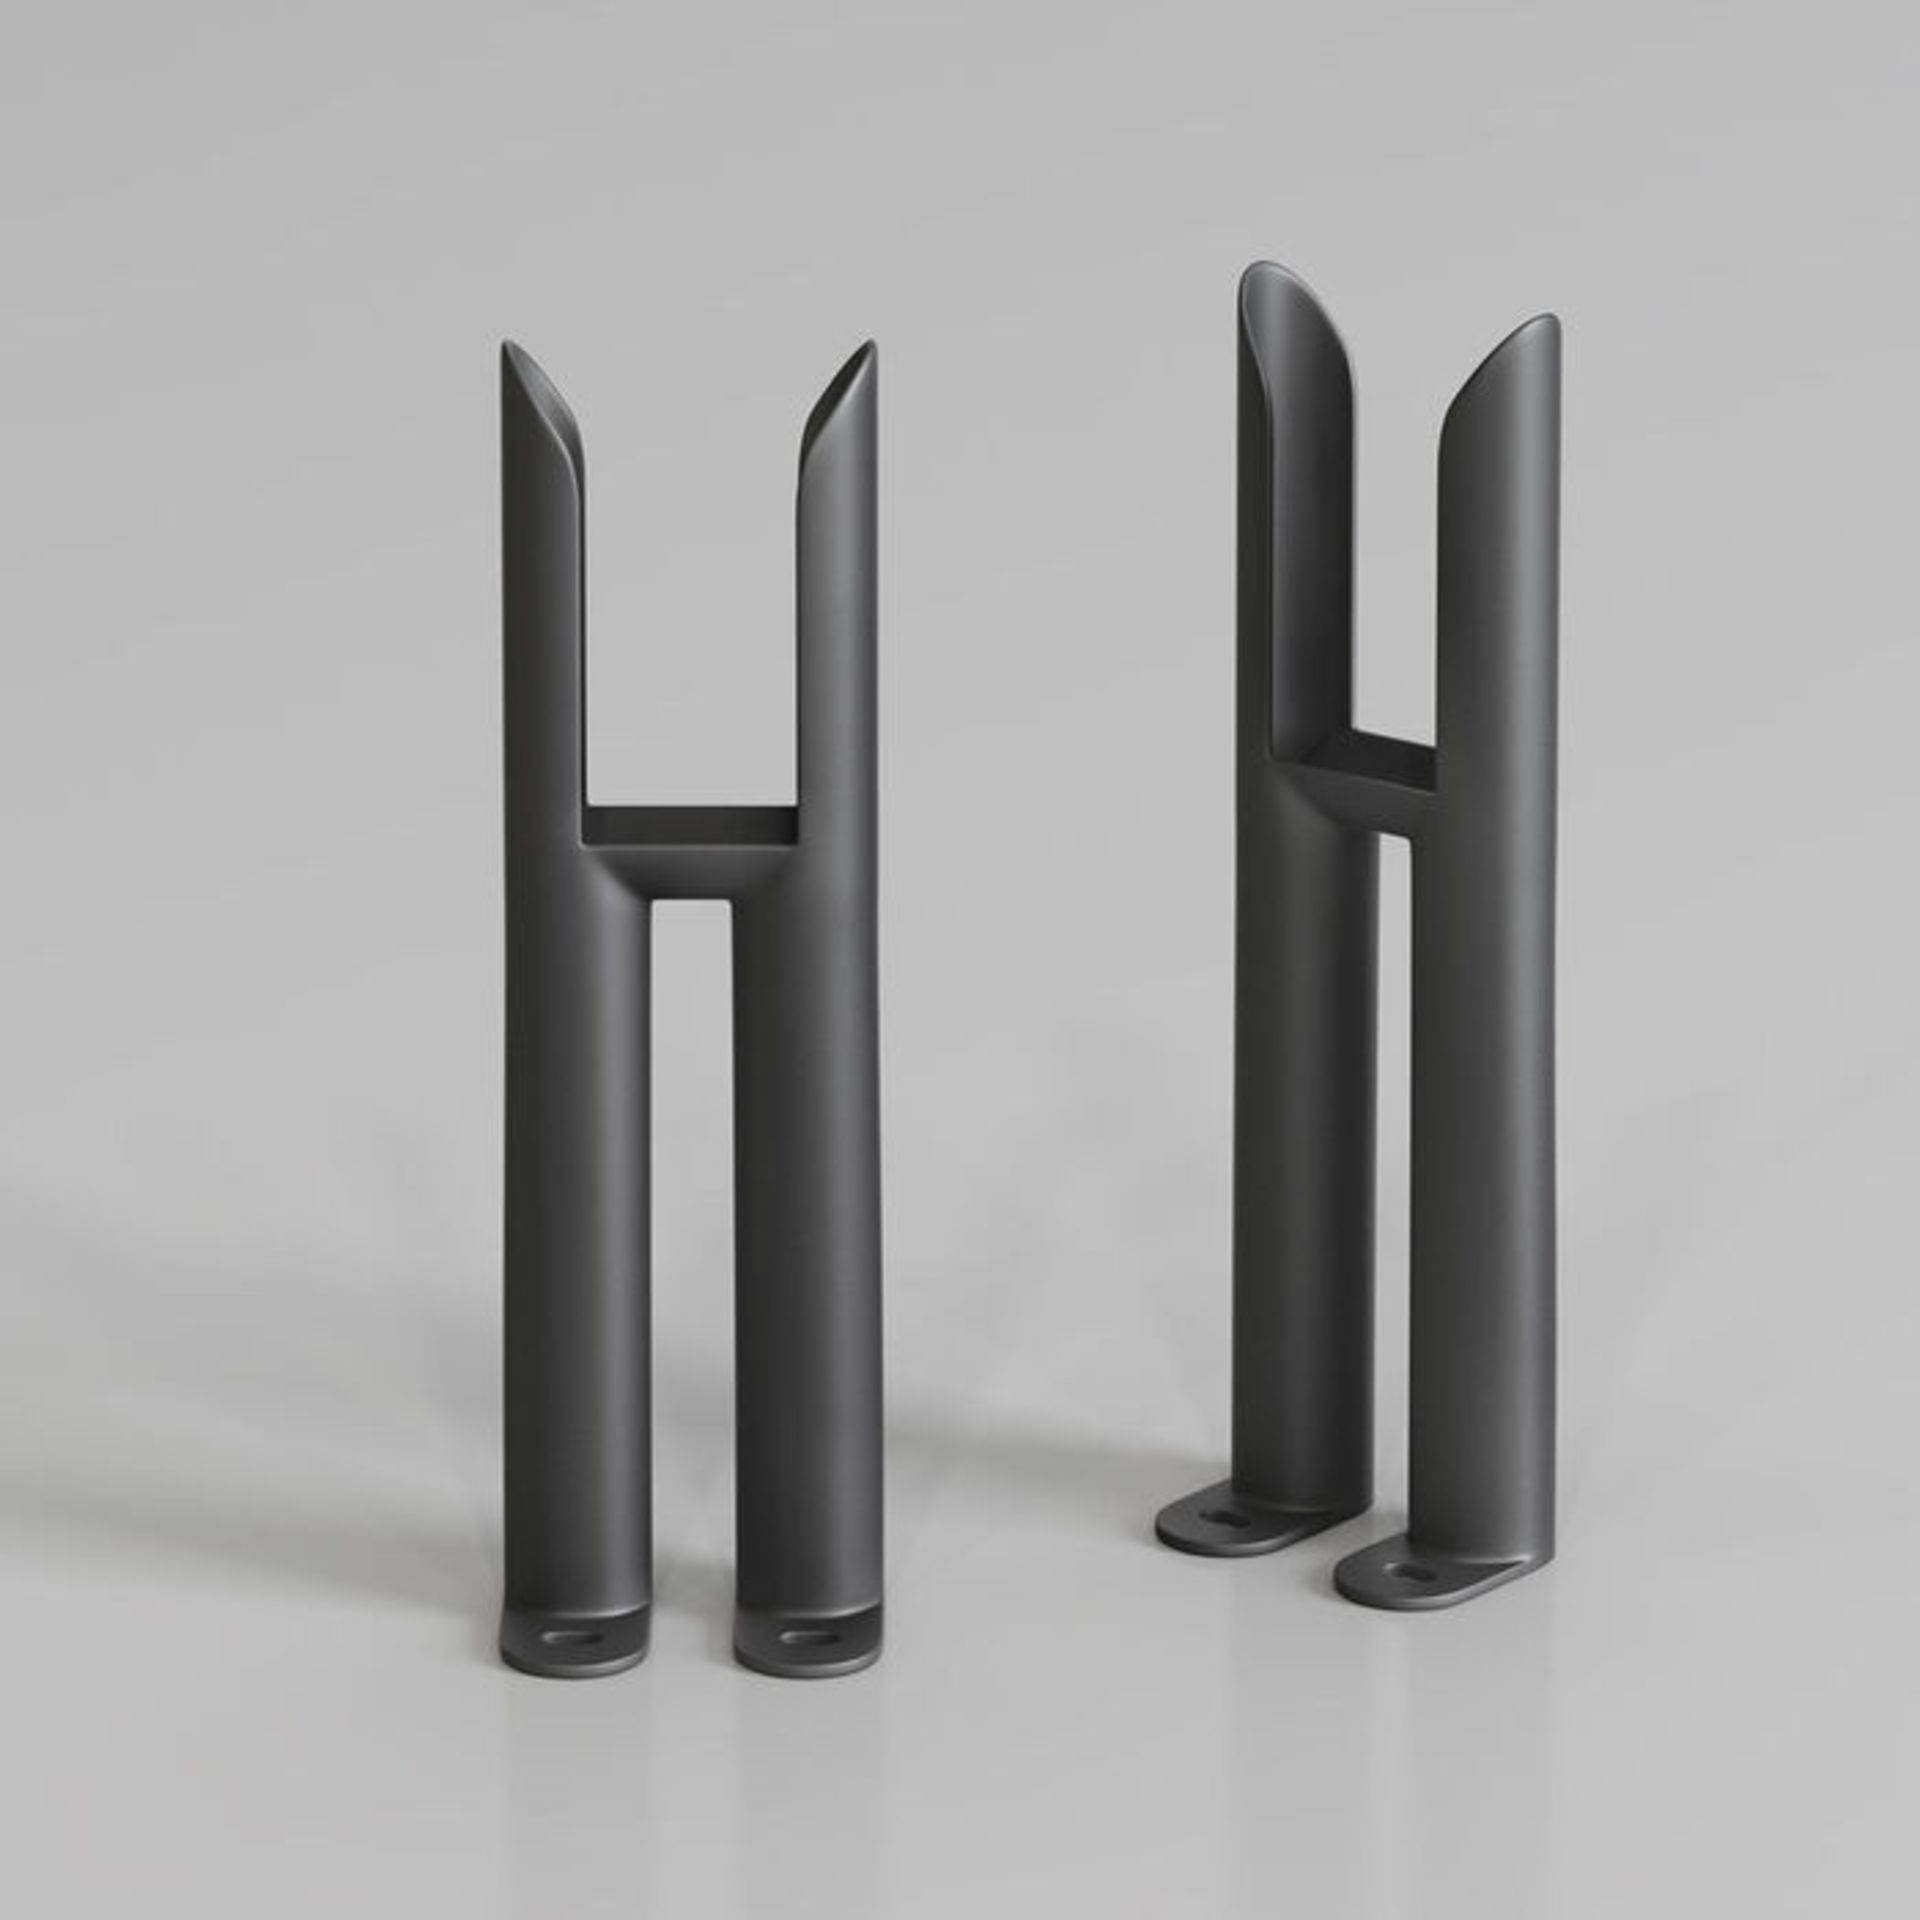 (EE1008) 300x72 Wall Mounting Feet Set for 2 Bar Radiators - Anthracite. Can be used to floor m... - Image 3 of 3